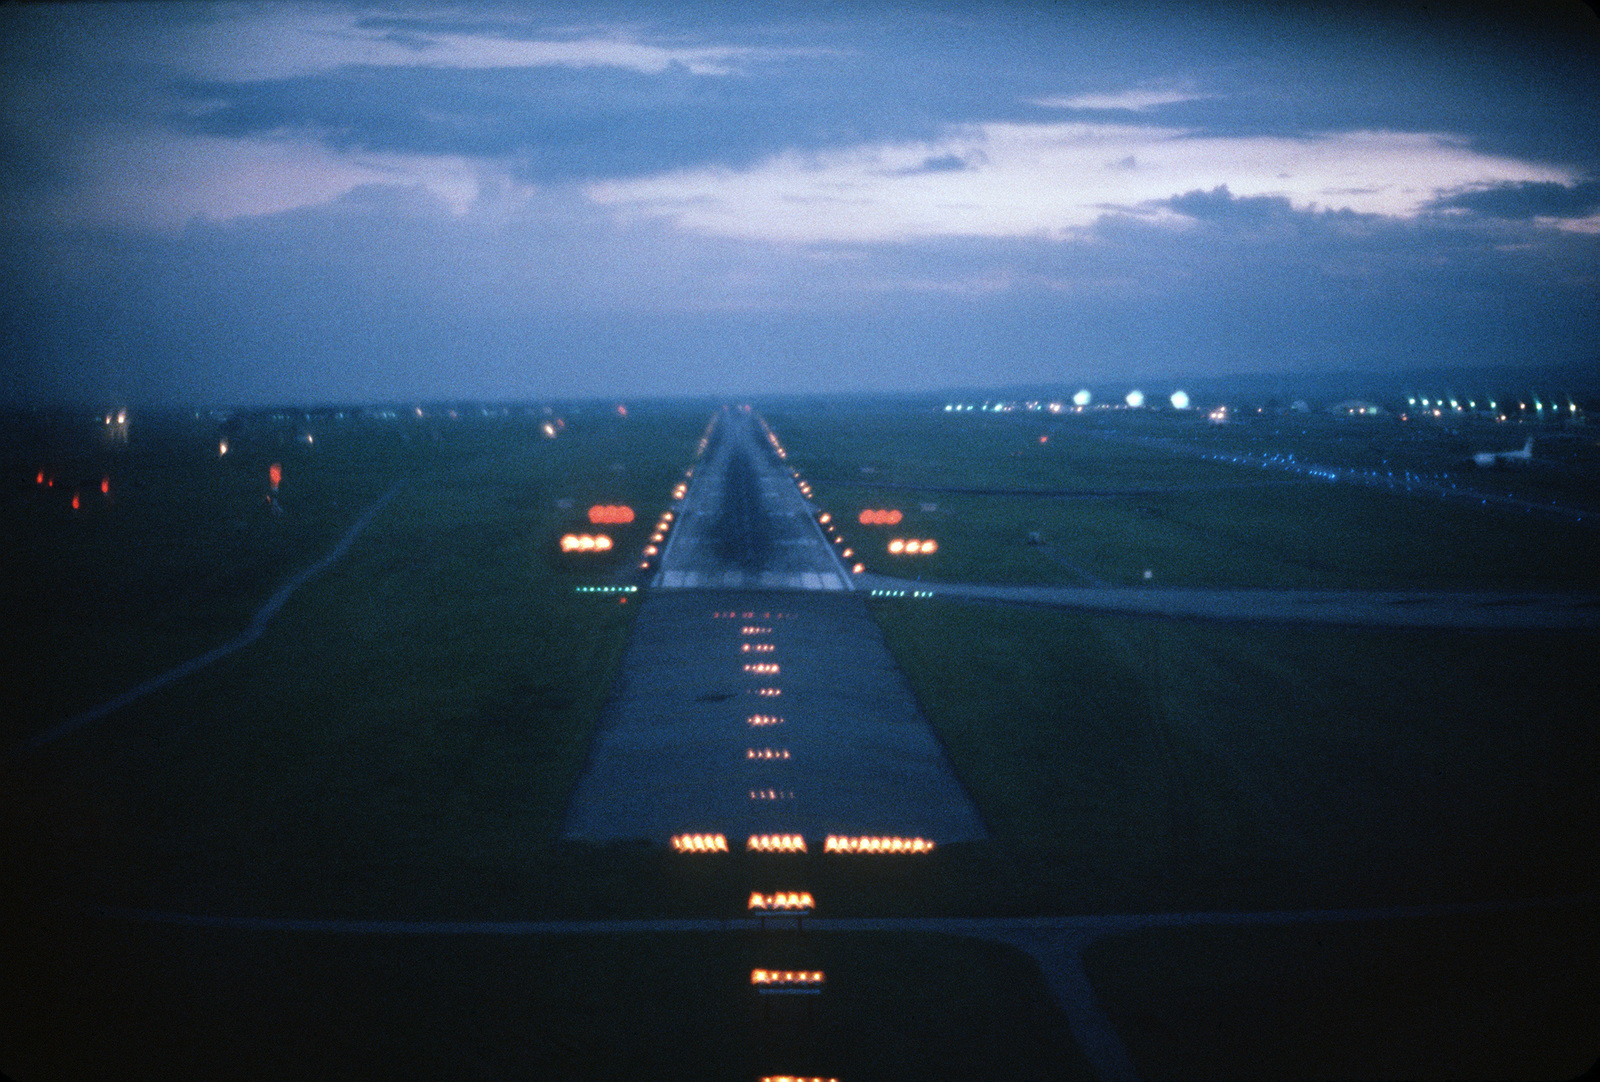 alternating red and white runway lights